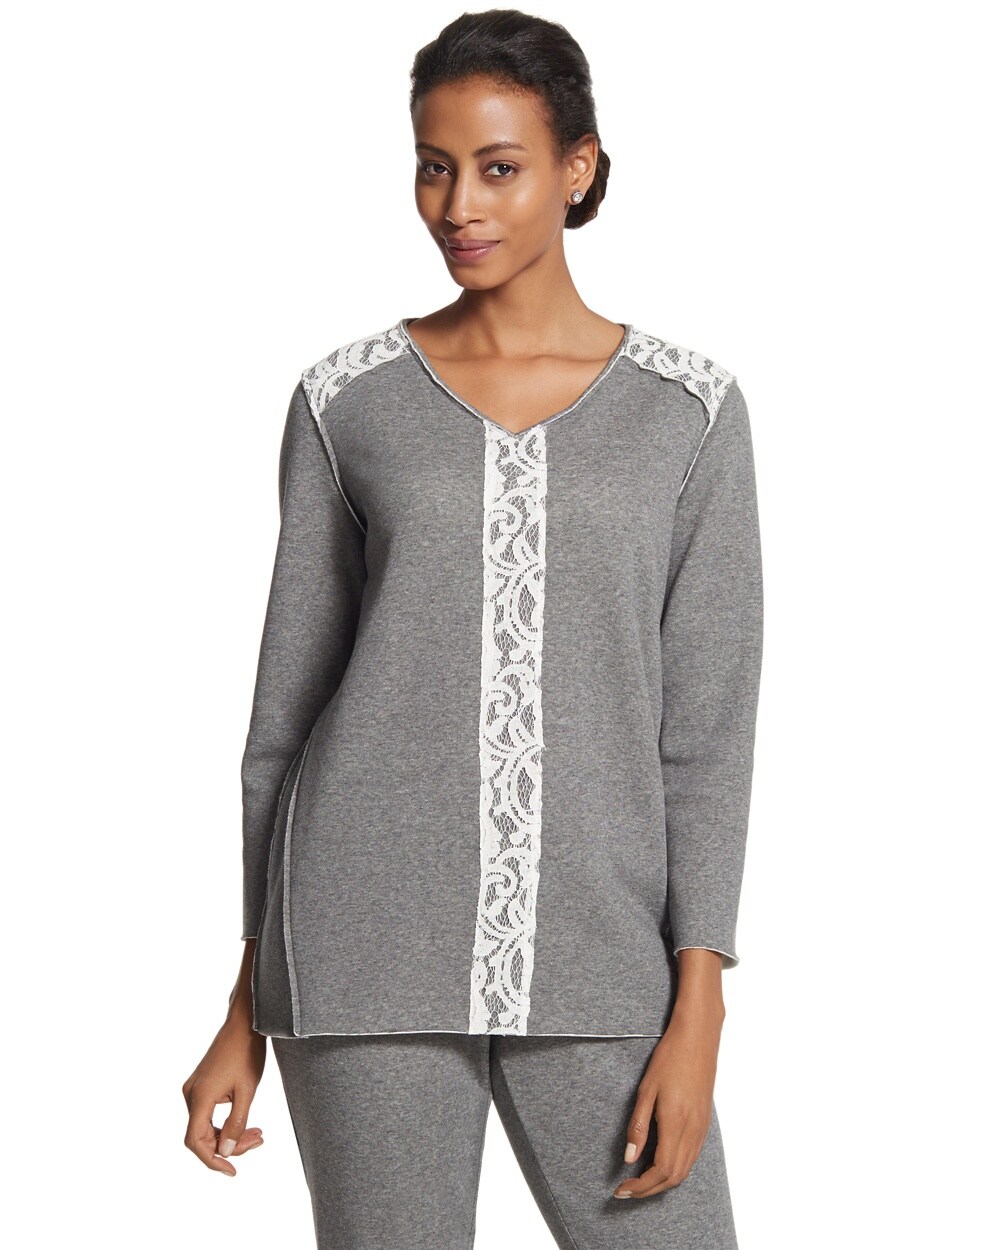 Zenergy Retreat Lace Pullover Top